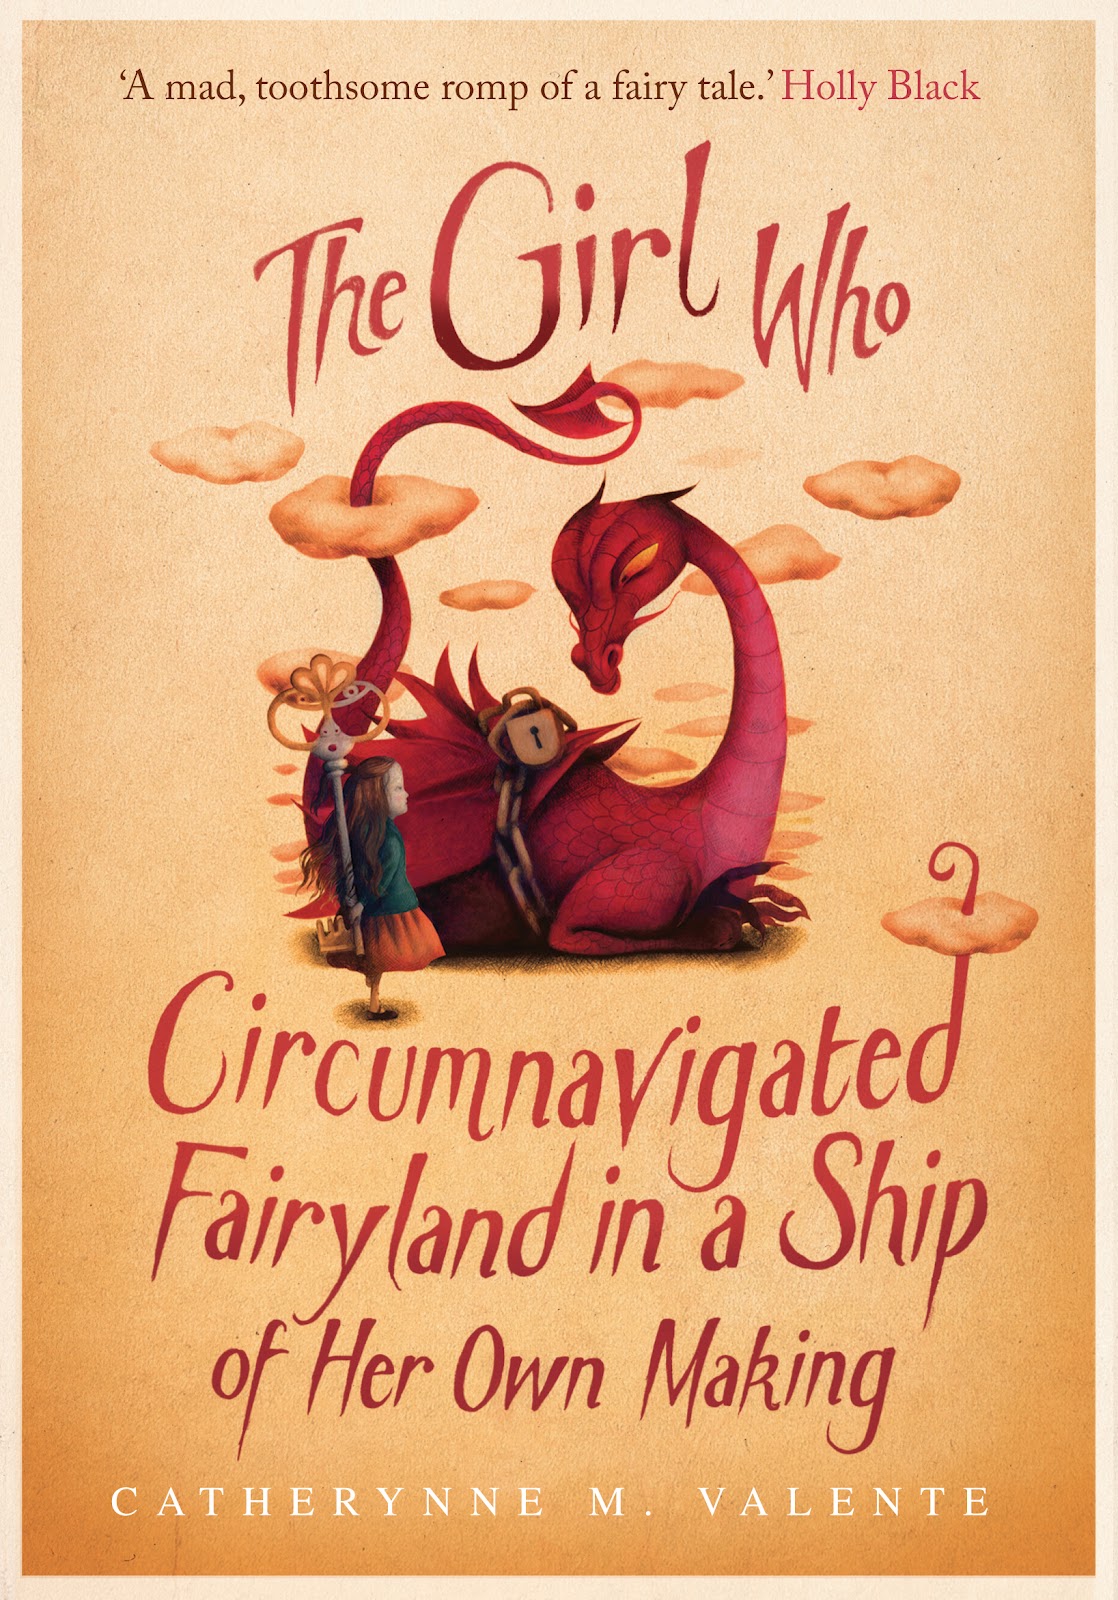 The+Girl+Who+Circumnavigated+Fairyland+in+a+Ship+of+Her+Own+Making